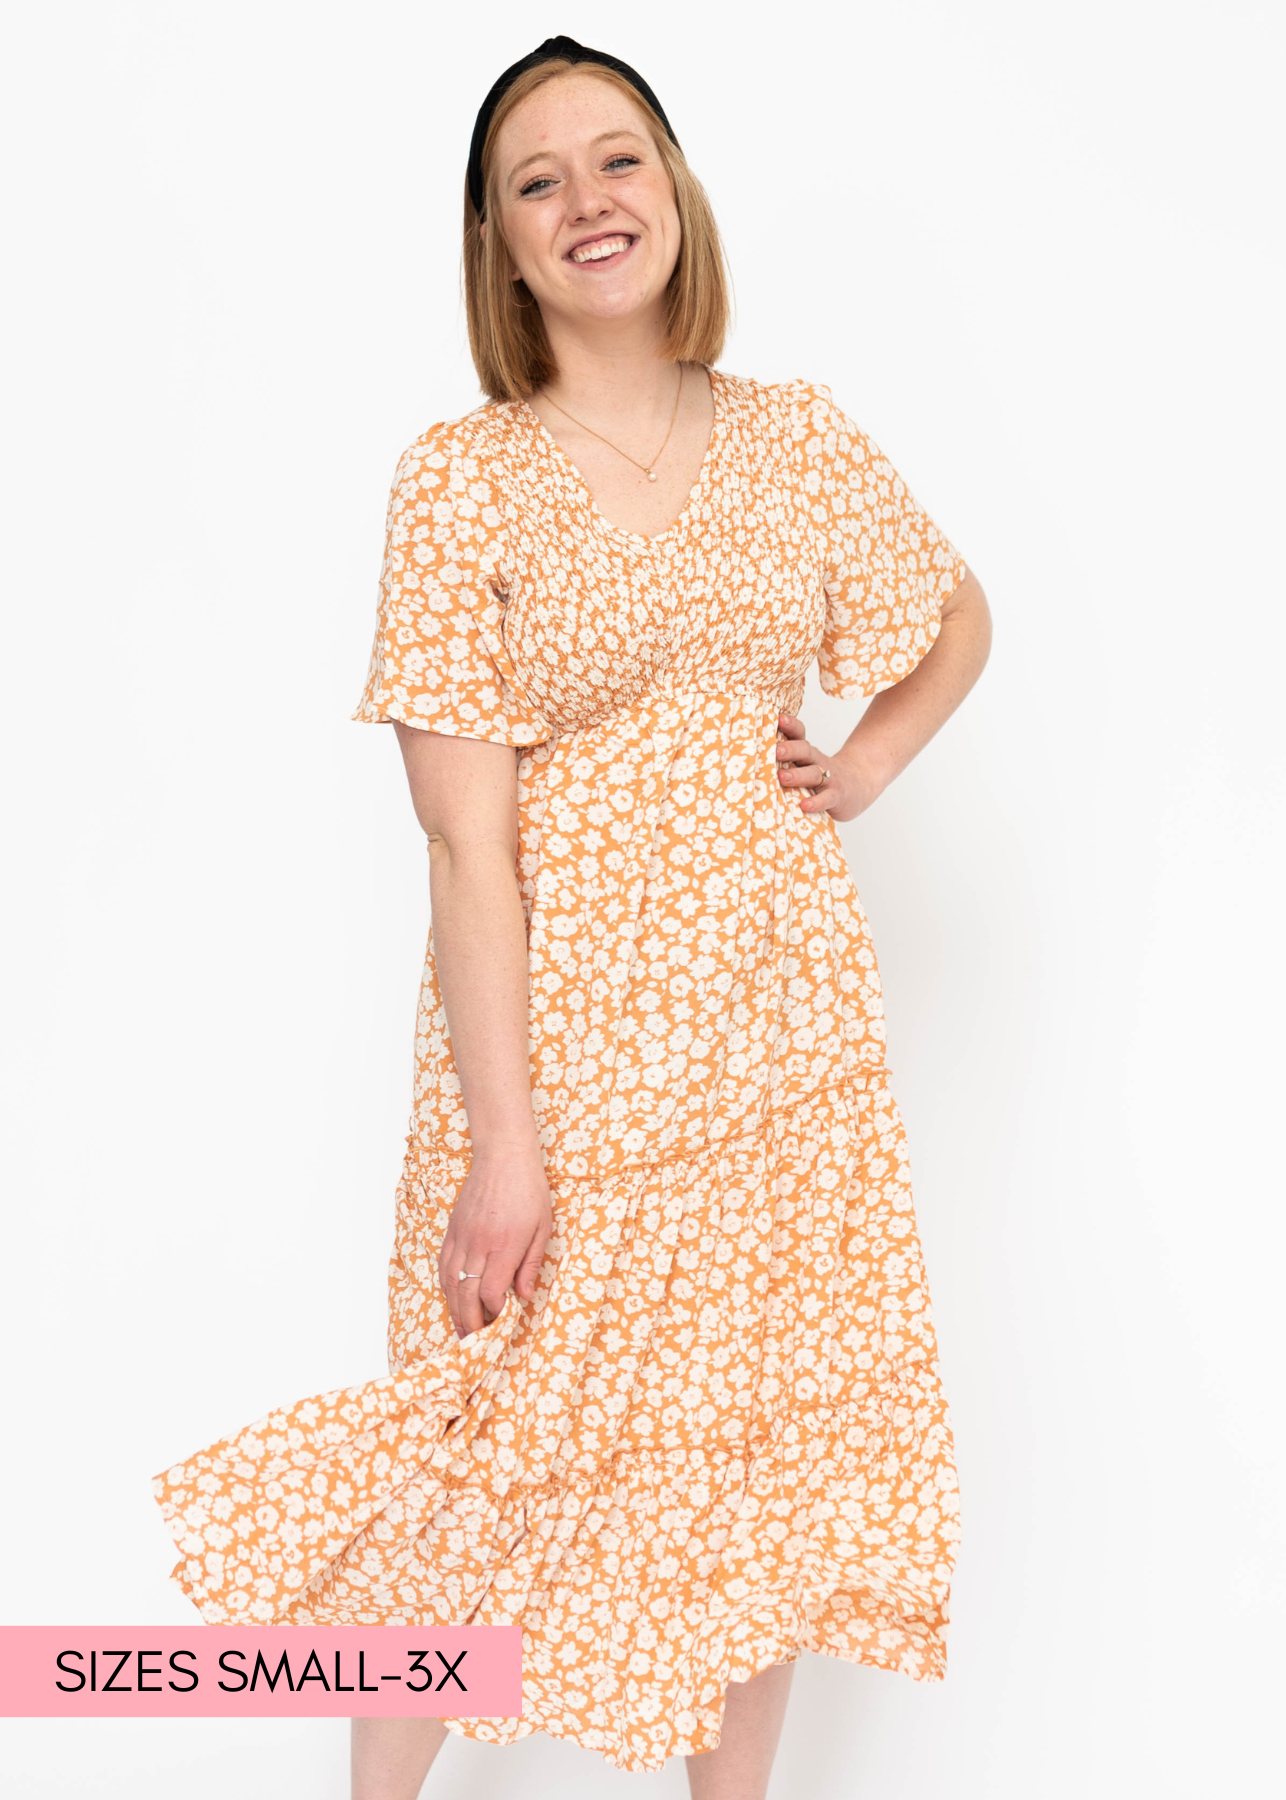 Short sleeve tiered apricot dress with white flowers and a V-neck.